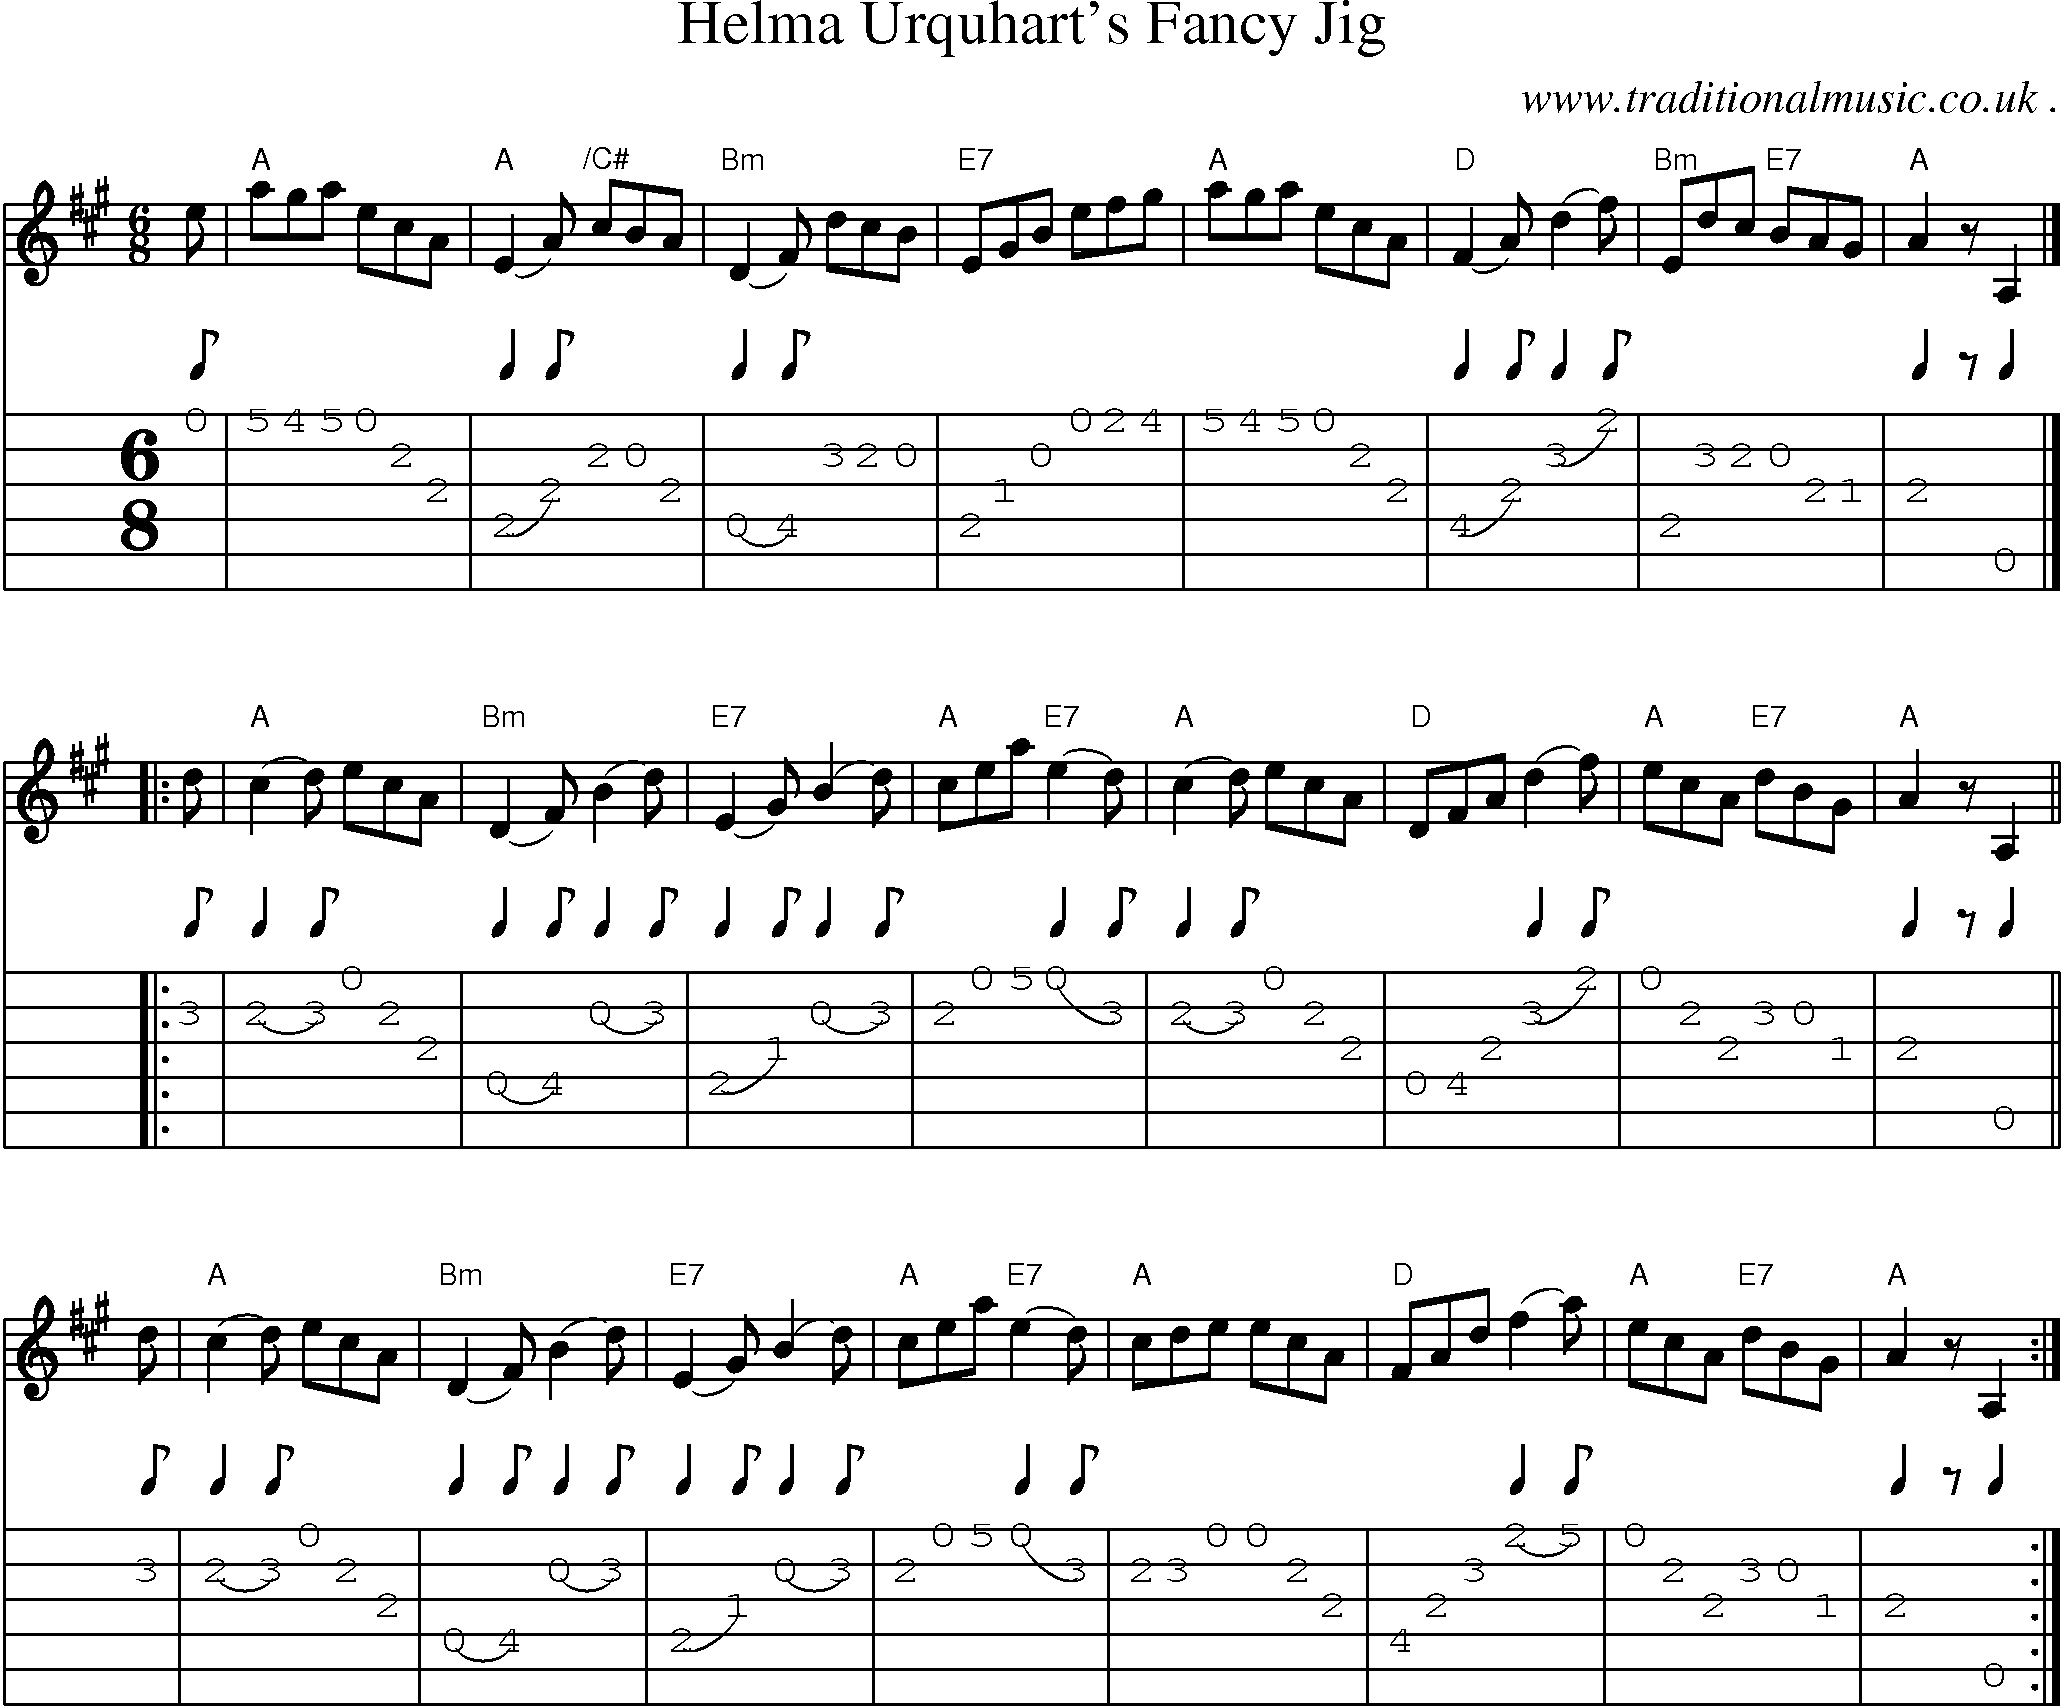 Sheet-music  score, Chords and Guitar Tabs for Helma Urquharts Fancy Jig